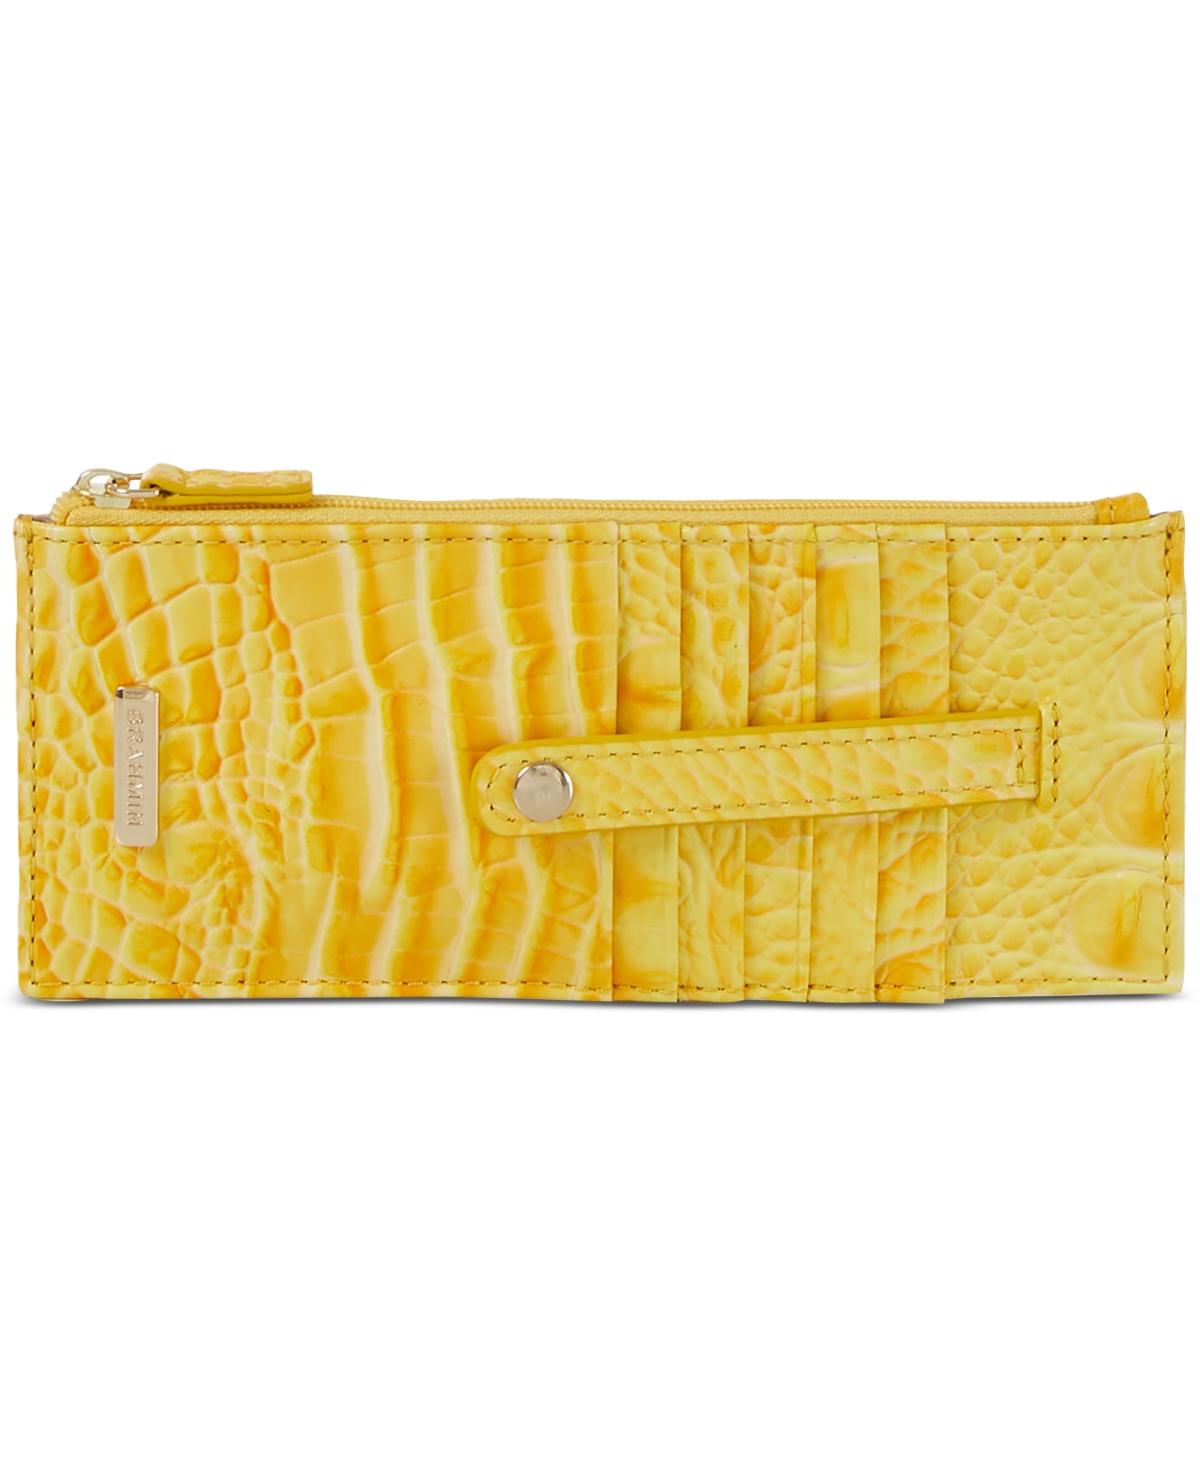 Brahmin Credit Card Melbourne Embossed Leather Wallet In Buttercup